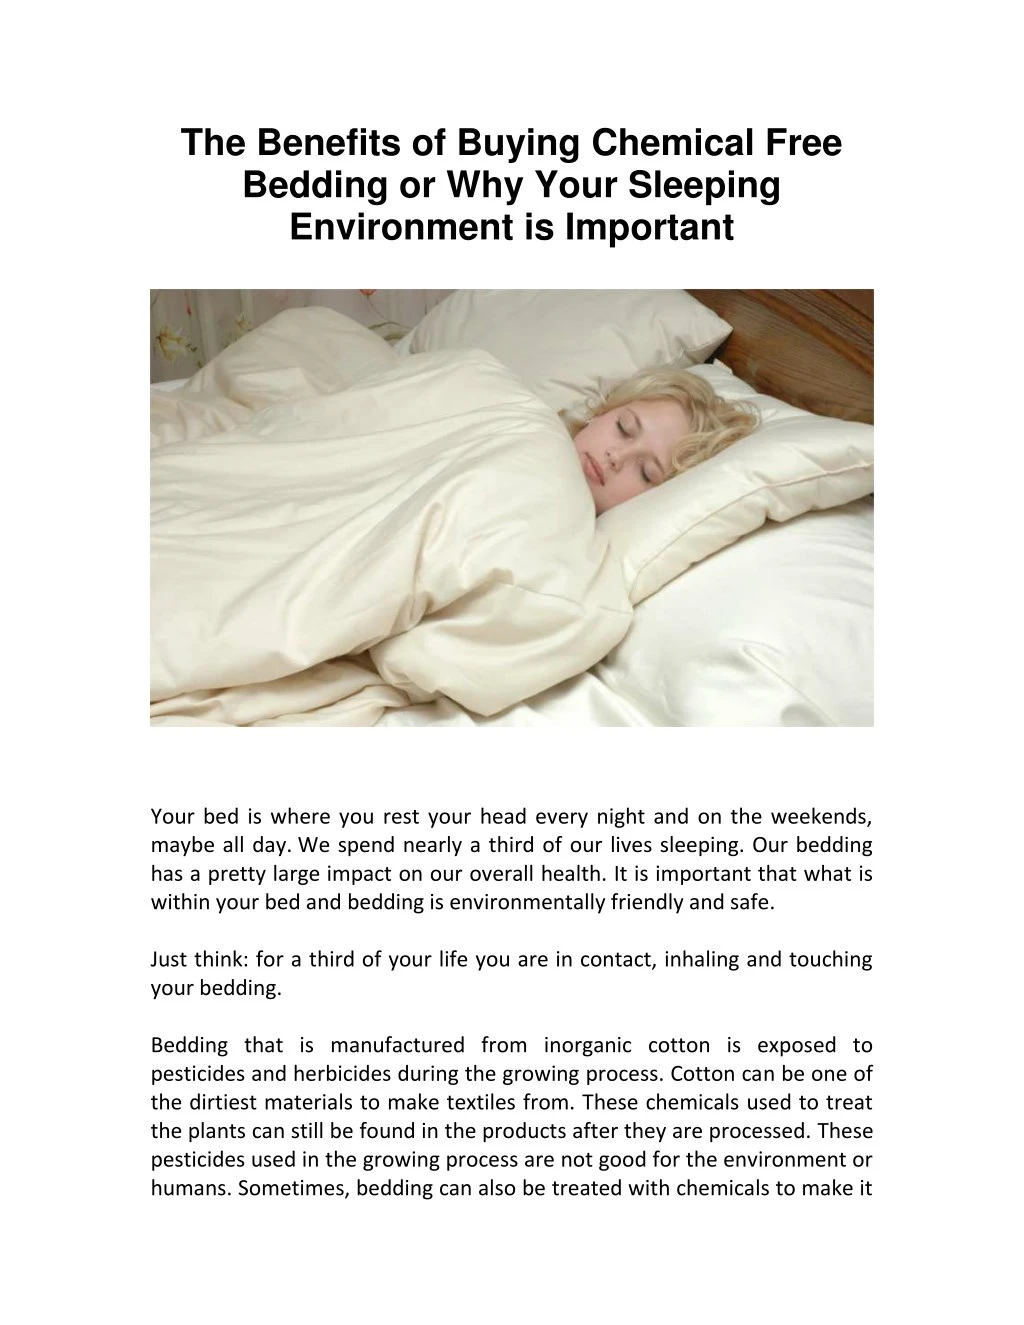 the benefits of buying chemical free bedding